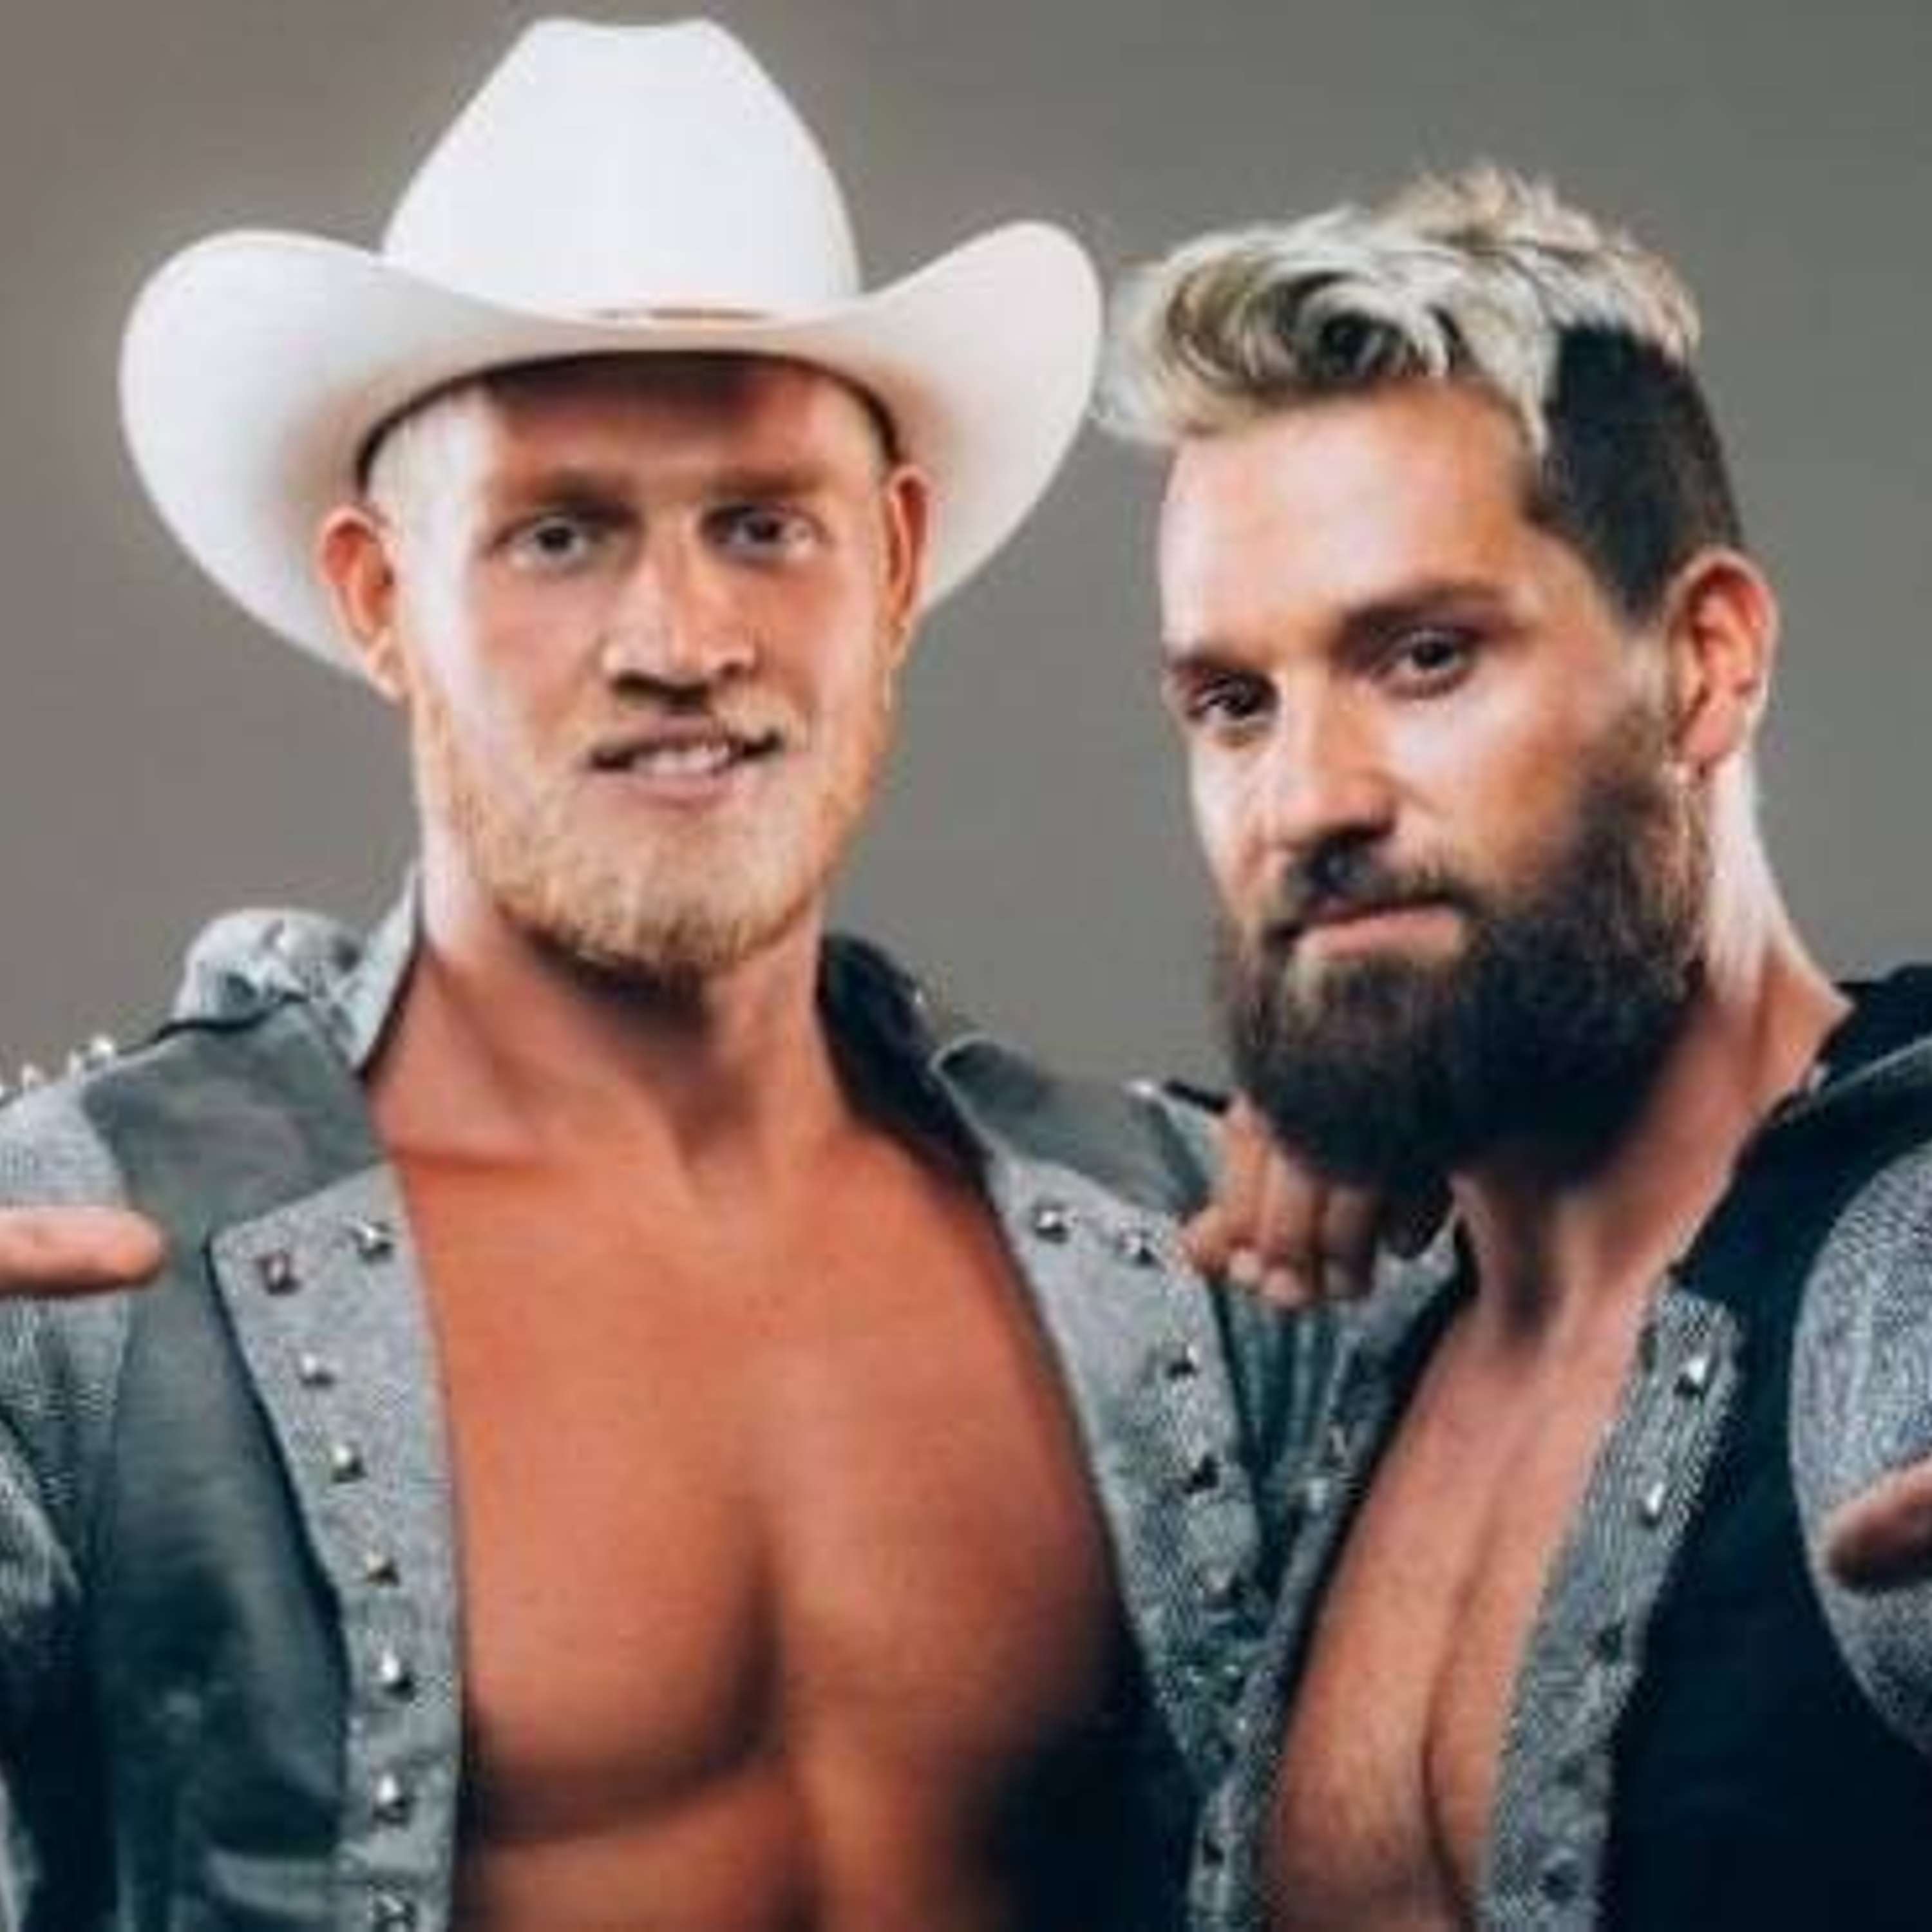 MLW's Ross & Marshal Von Erich on Carrying on the Family Legacy, Chemistry With The Dynasty, More